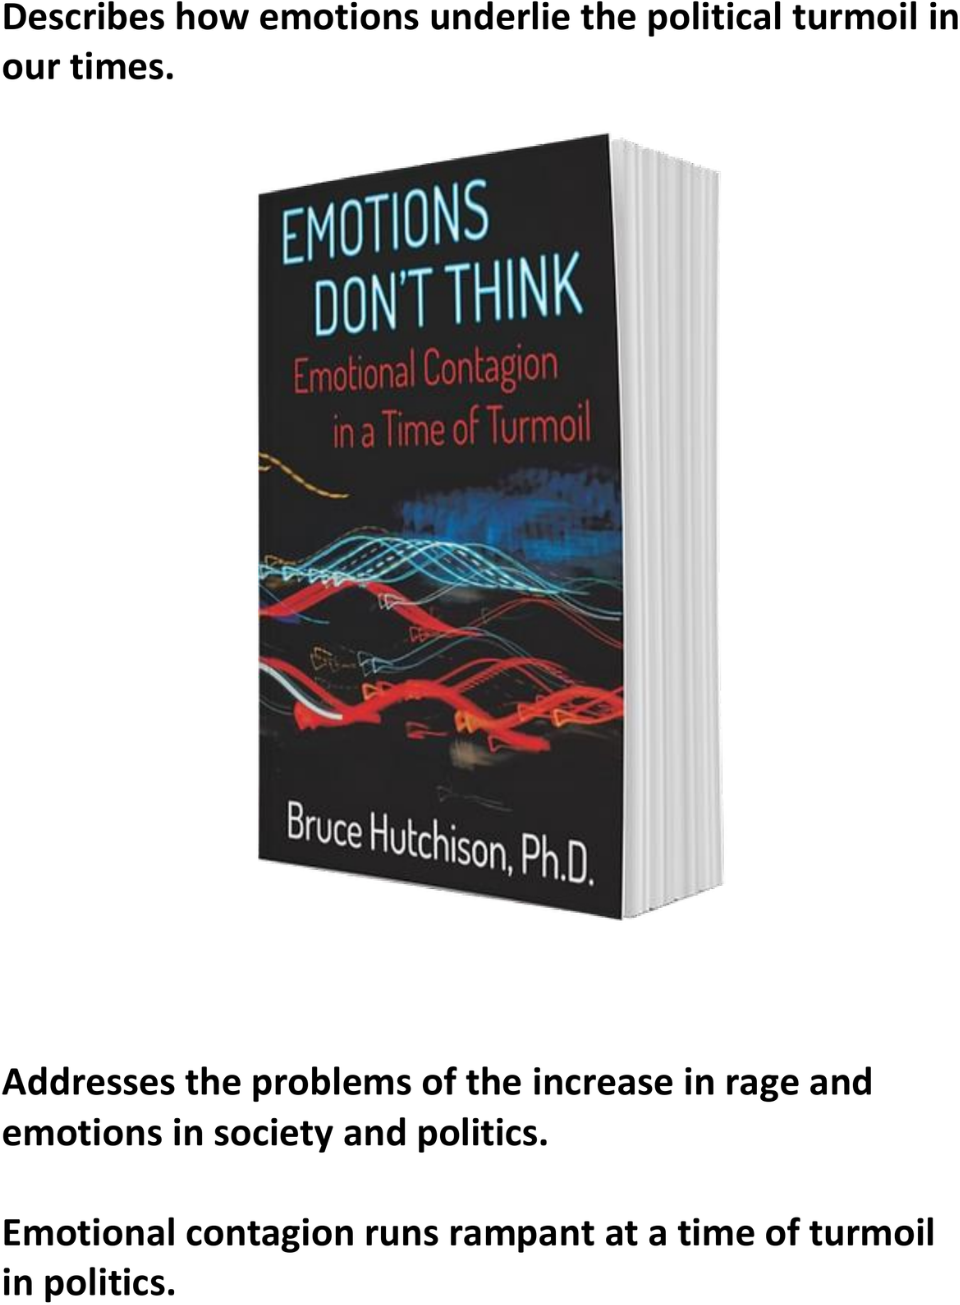 Emotions Don't Think: Emotional Contagion in a Time of  LatestTurmoil